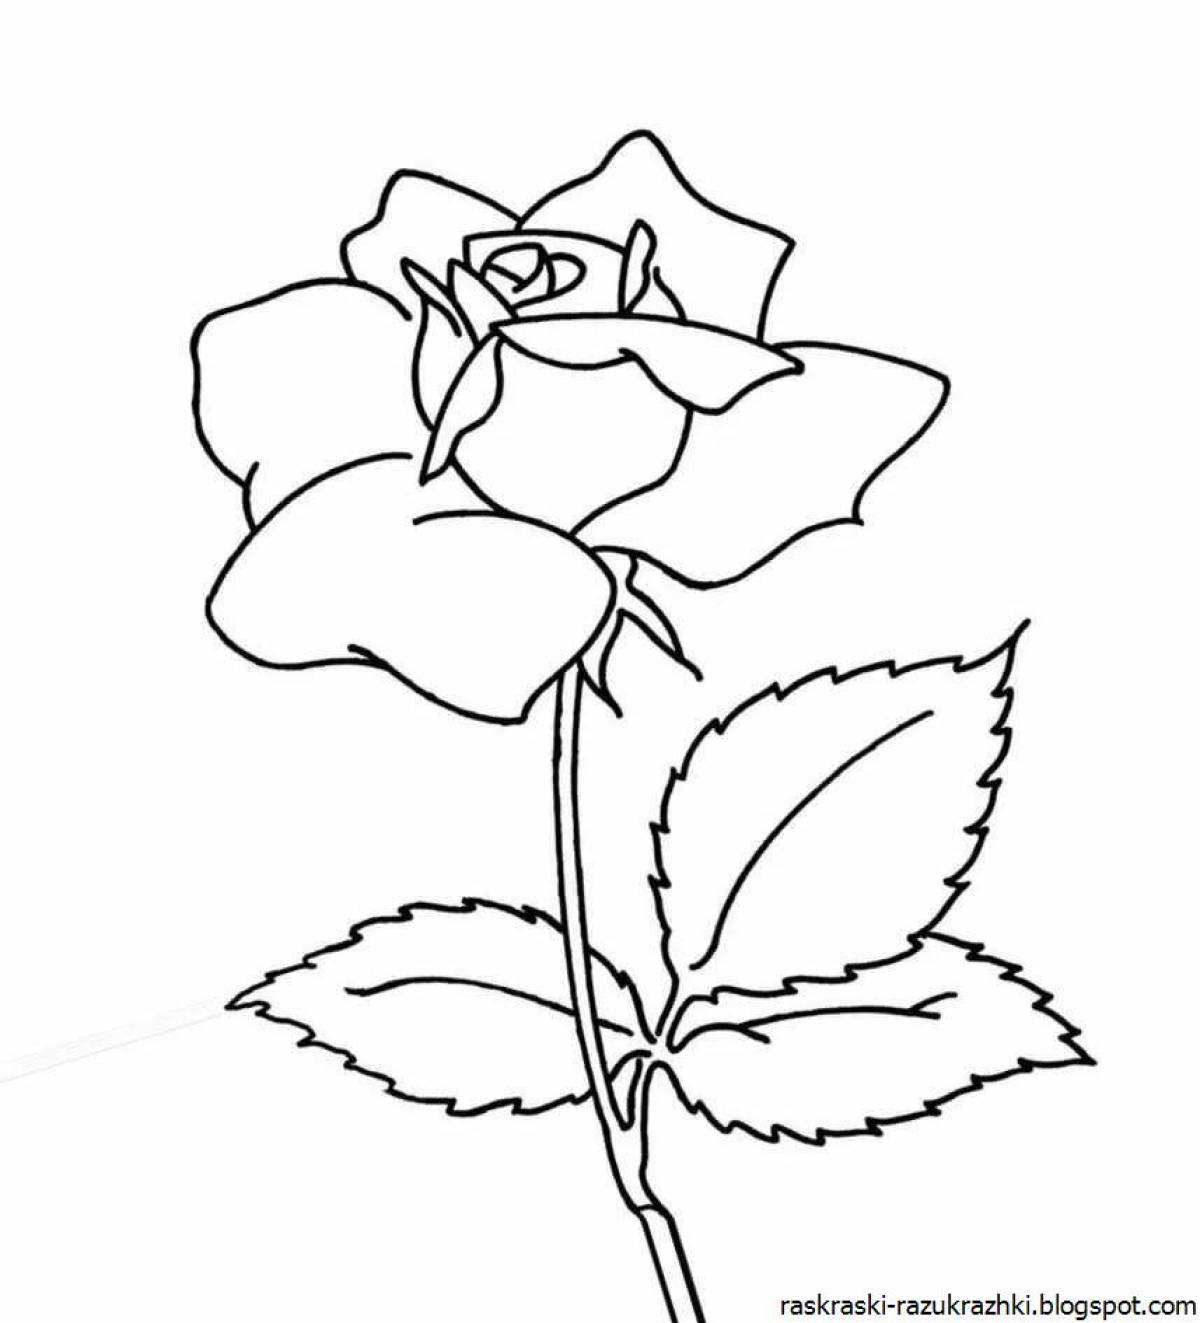 Adorable flower coloring pages for kids 6-7 years old